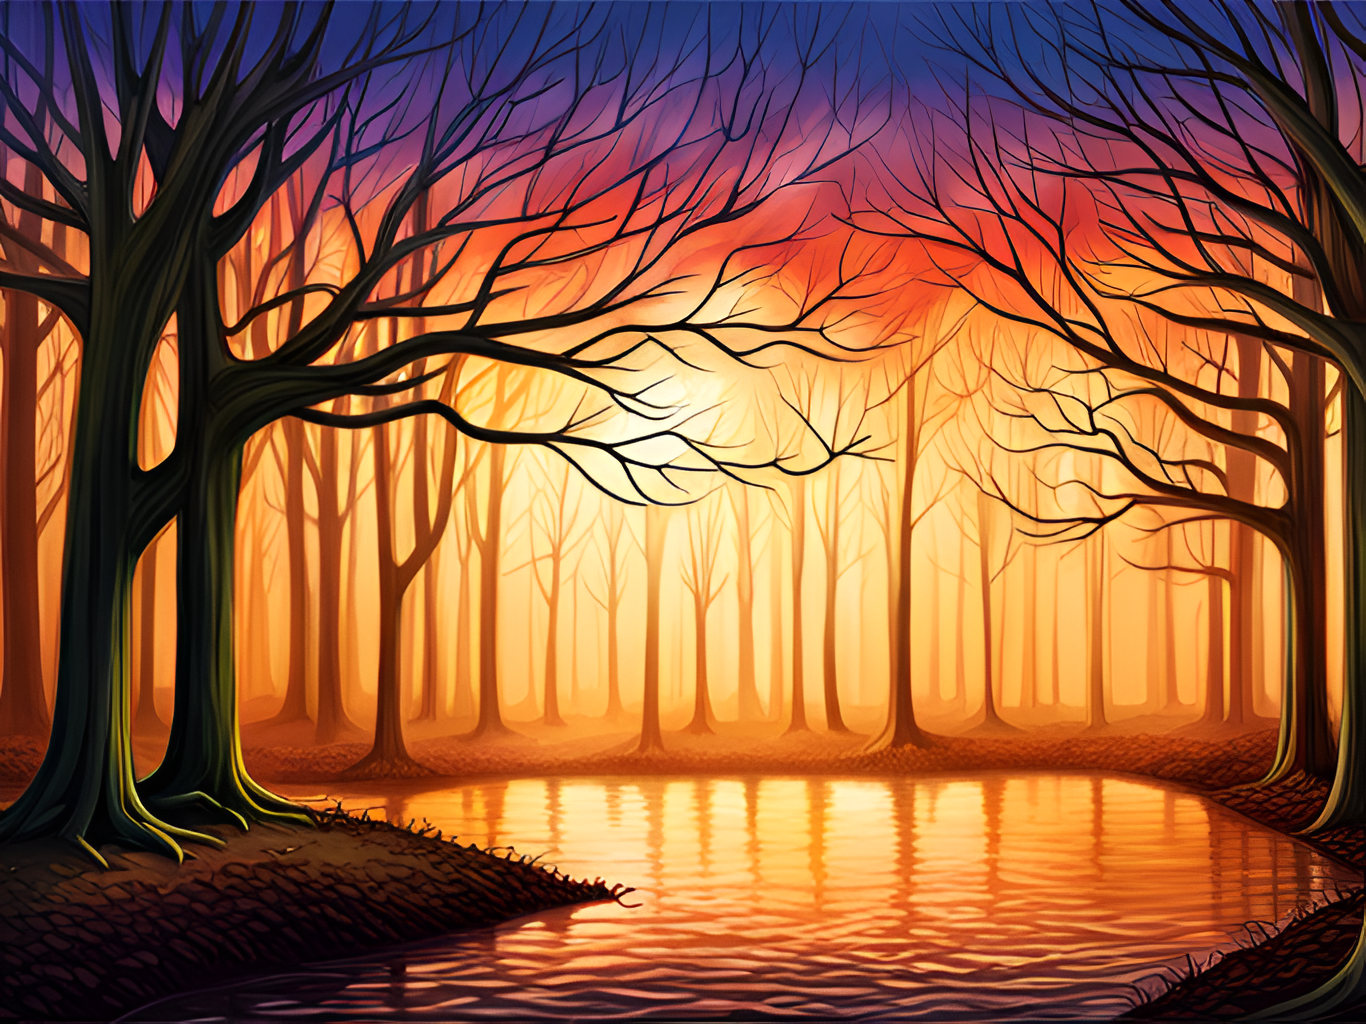 An image synthesized by SDXL. Sort of a drawing or painting, skillfully done, showing tall, thin trees with no leaves, around a pond. The trees are mostly in silhouette. There is brilliant sunset light shining in from the distance, bright yellow in the middle, fading to bright yellow-orange on the sides, and fading to deep orange, pink, and dark violet at the top. The bright yellow and orange light reflect off many ripples in the pond. Overall, it is beautiful, soothing, and serene, which contrasts with the deep, vibrant colors and silhouetted trees.